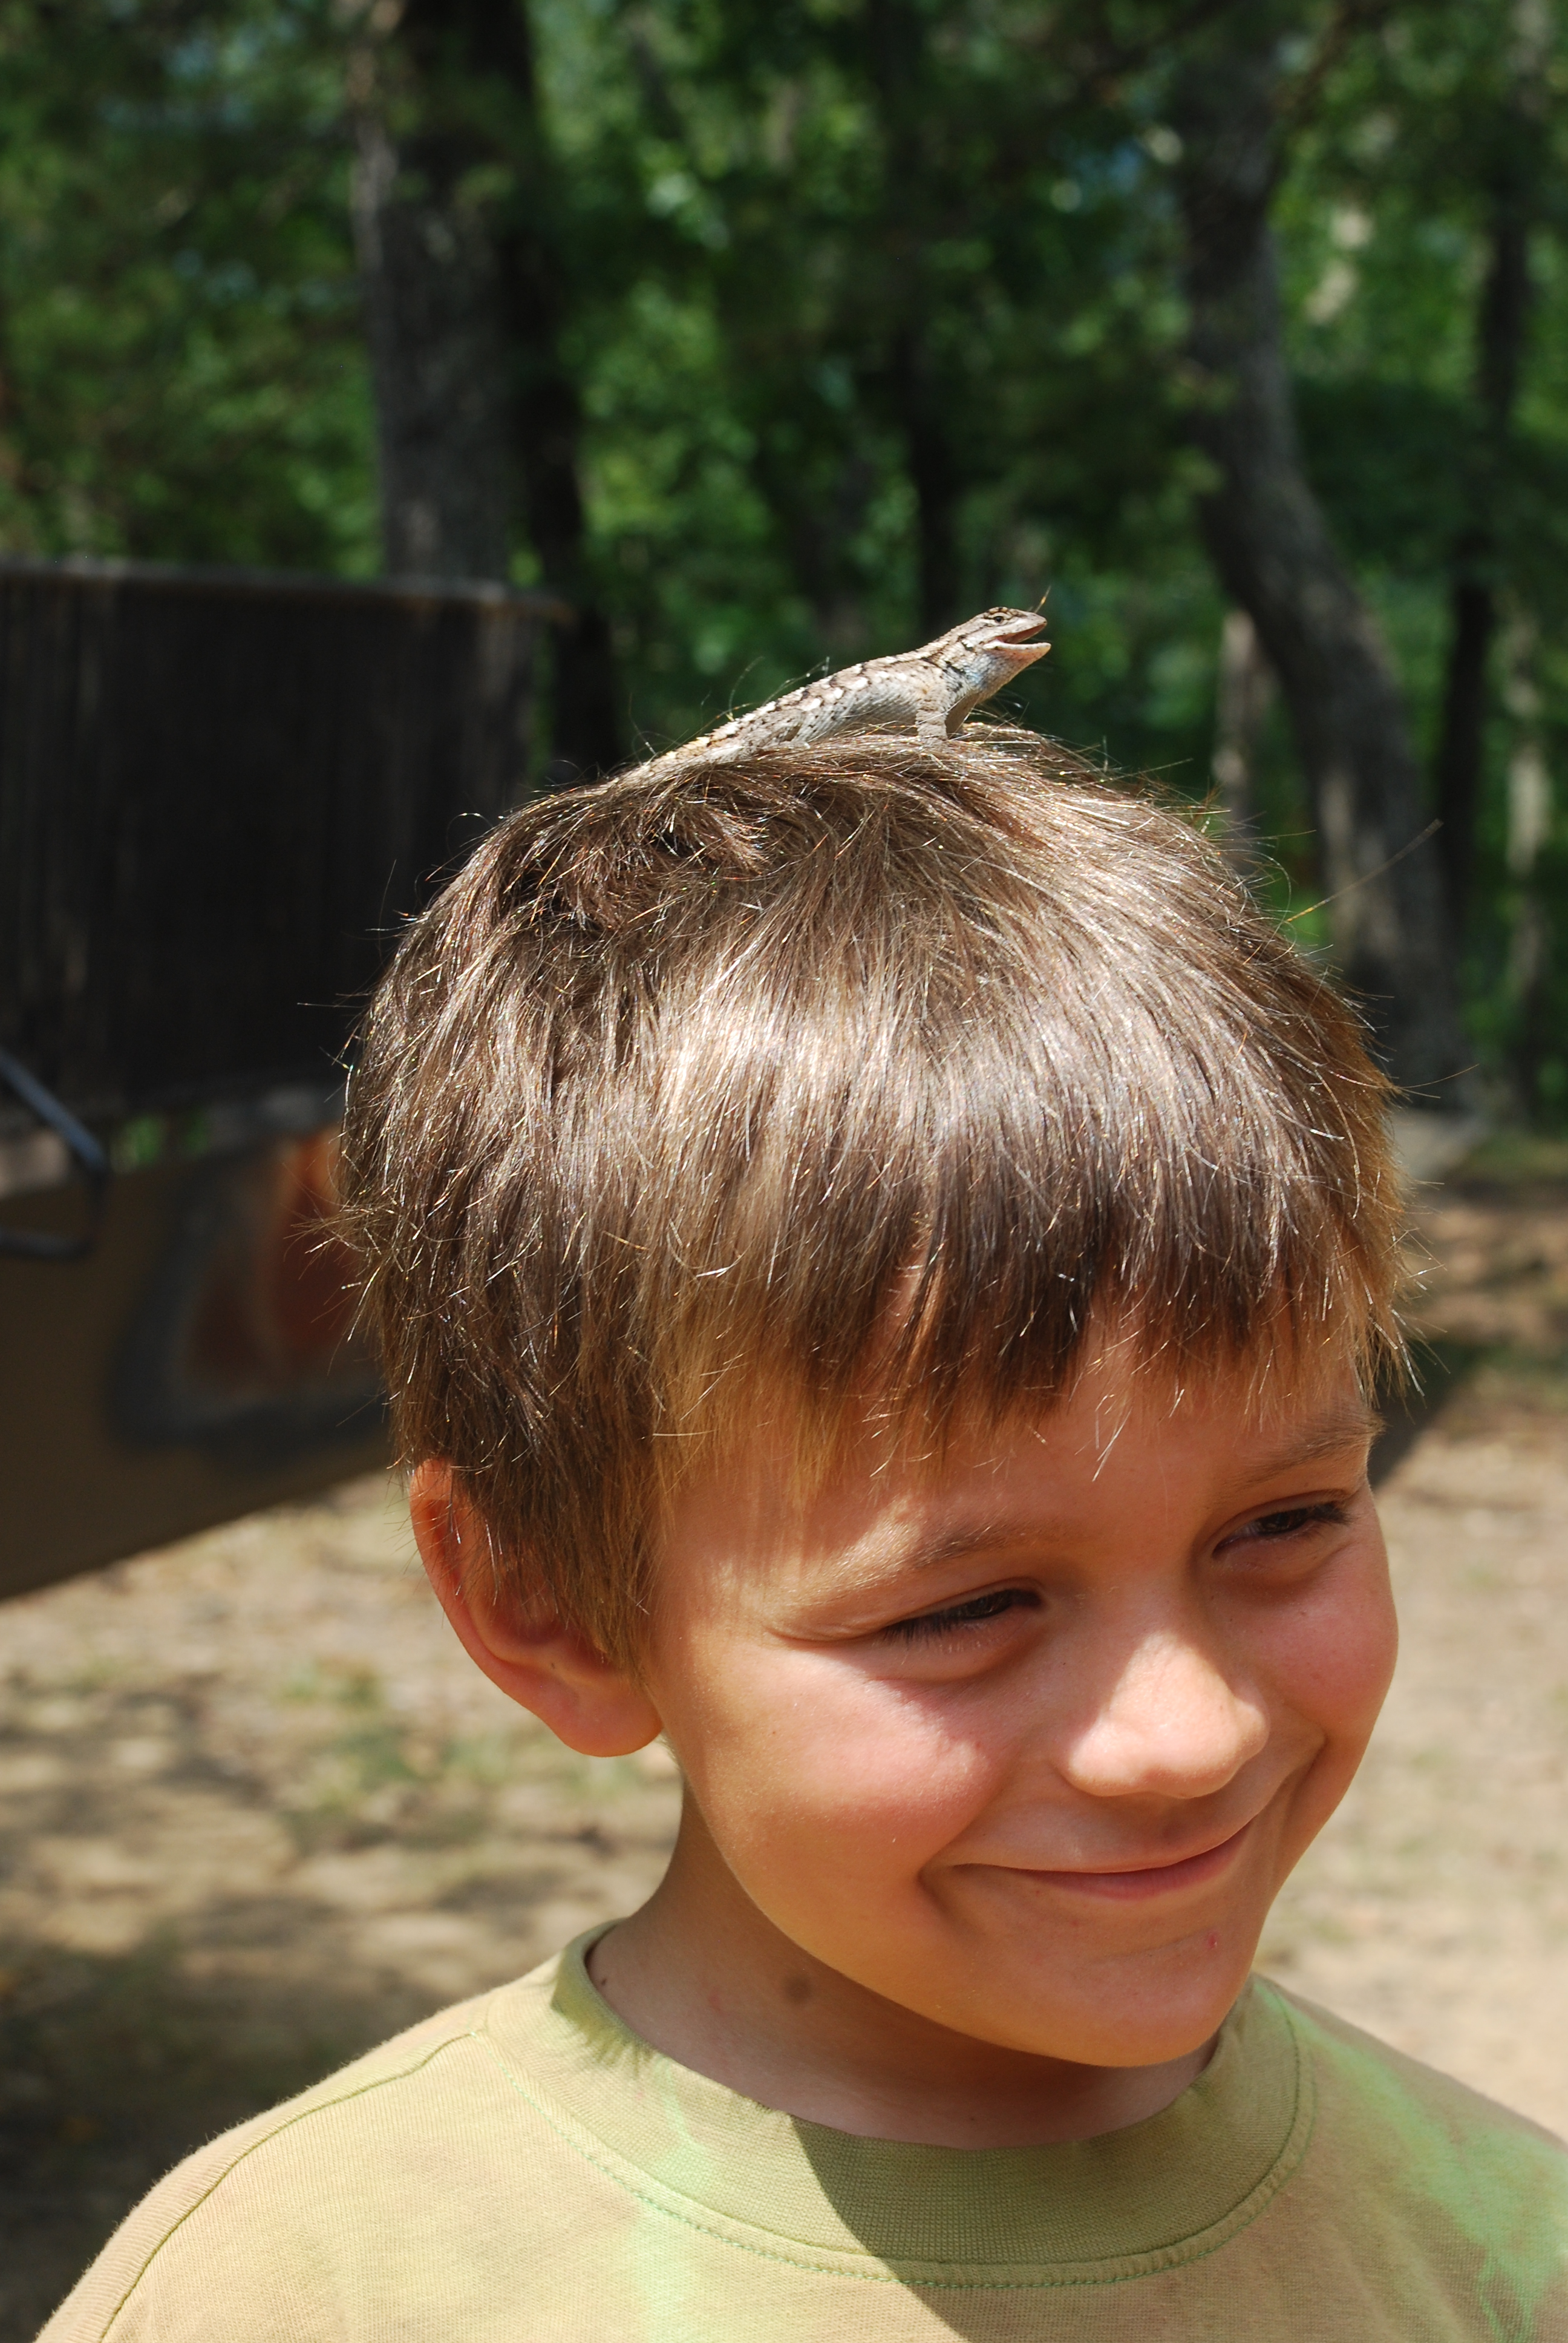 Douthat State Park - Eastern fence lizard on a head